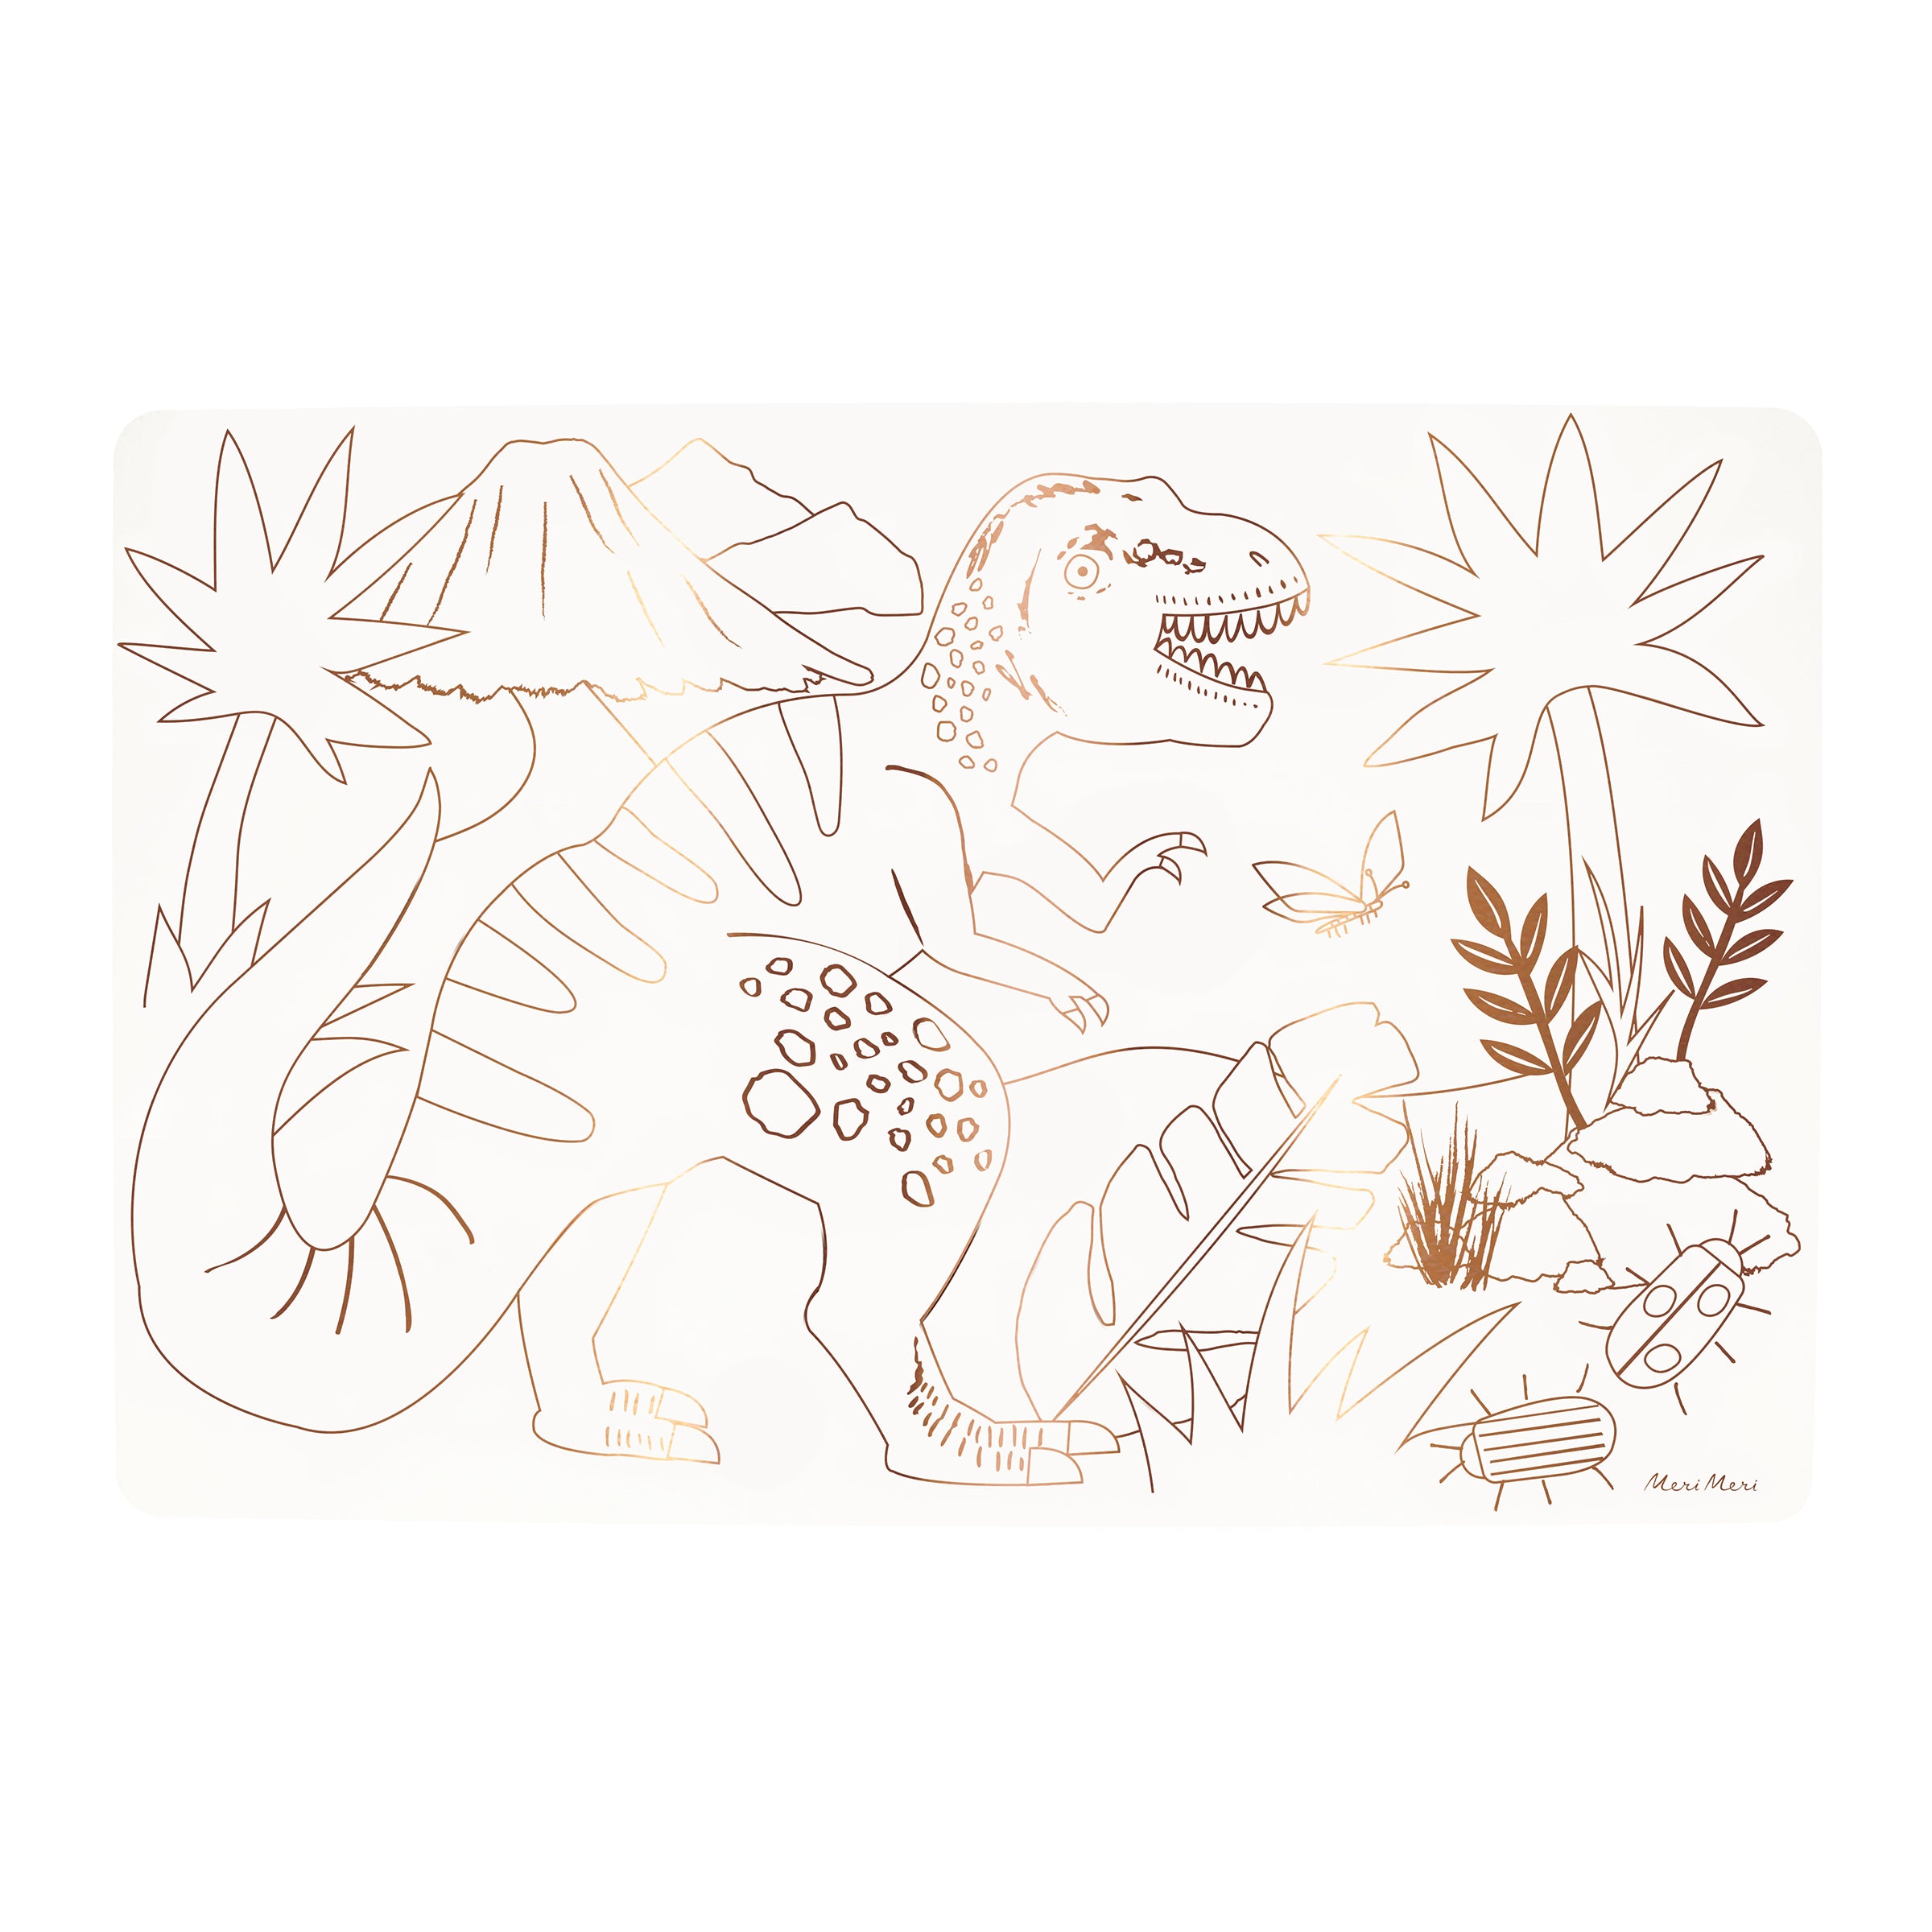 Coloring time is here, with out special kids placemats featuring dinosaurs, perfect for a dinosaur party.